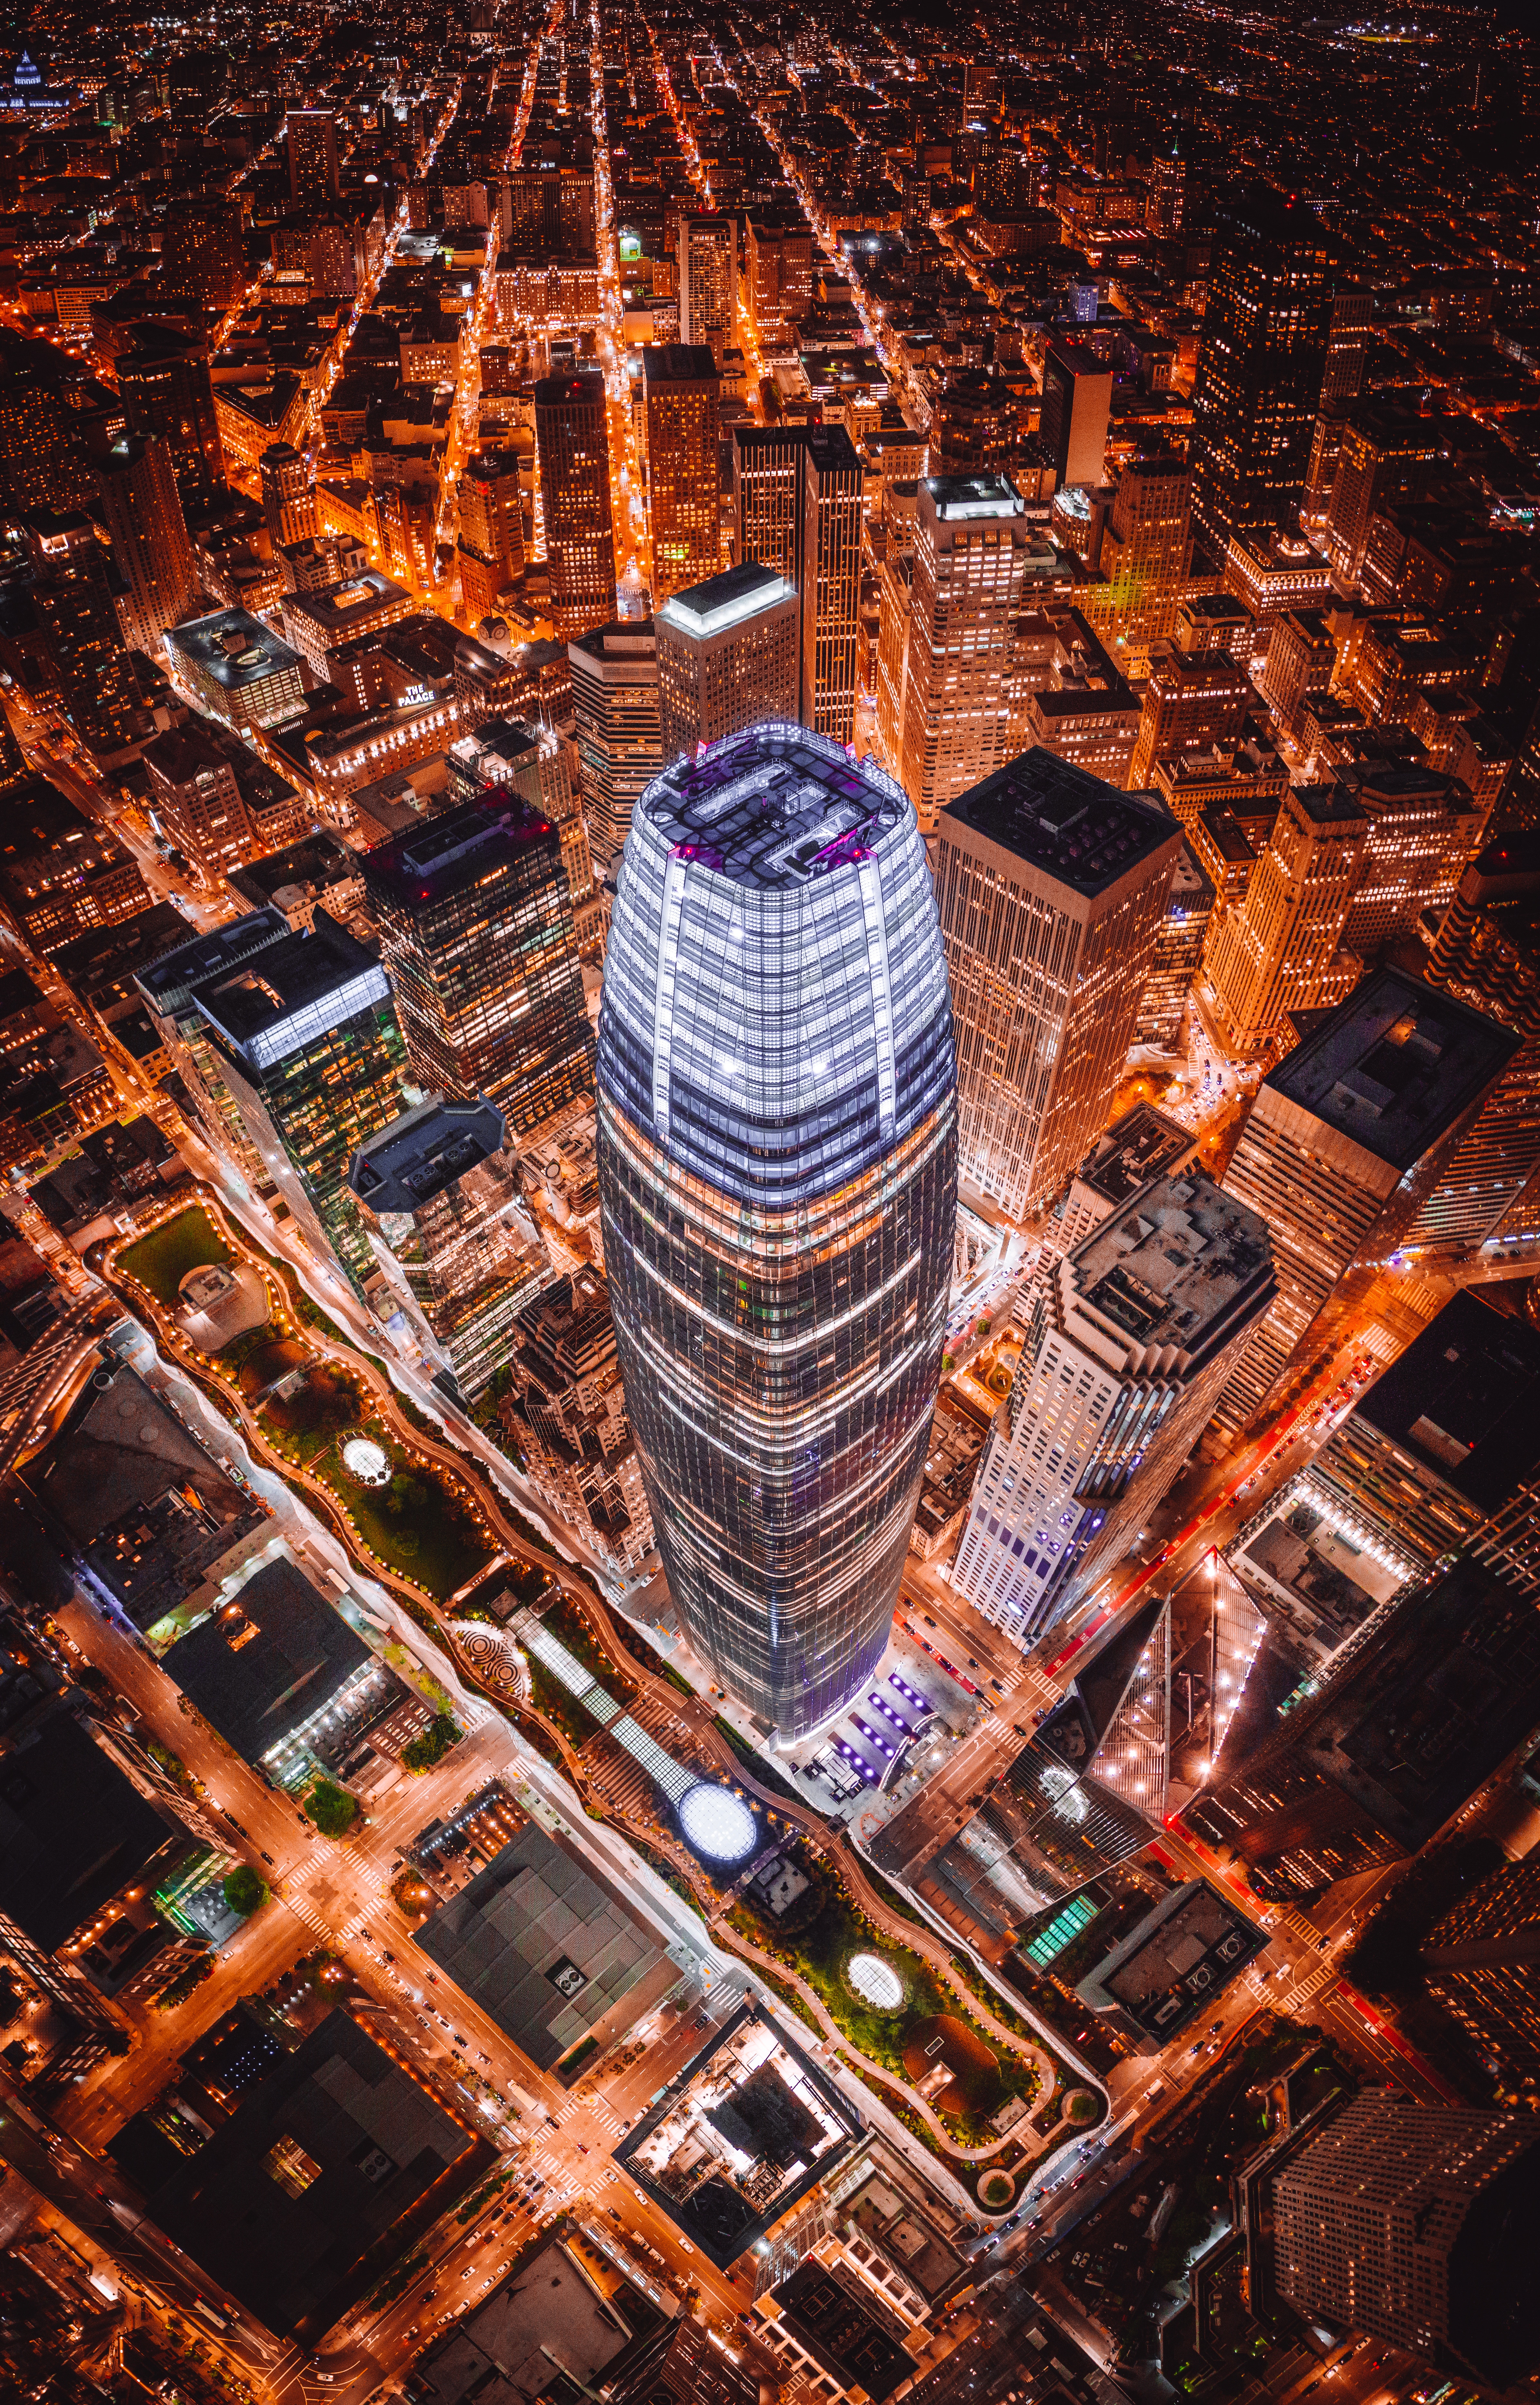 cities, architecture, building, view from above, night city, skyscrapers, tower, roof, roofs, towers